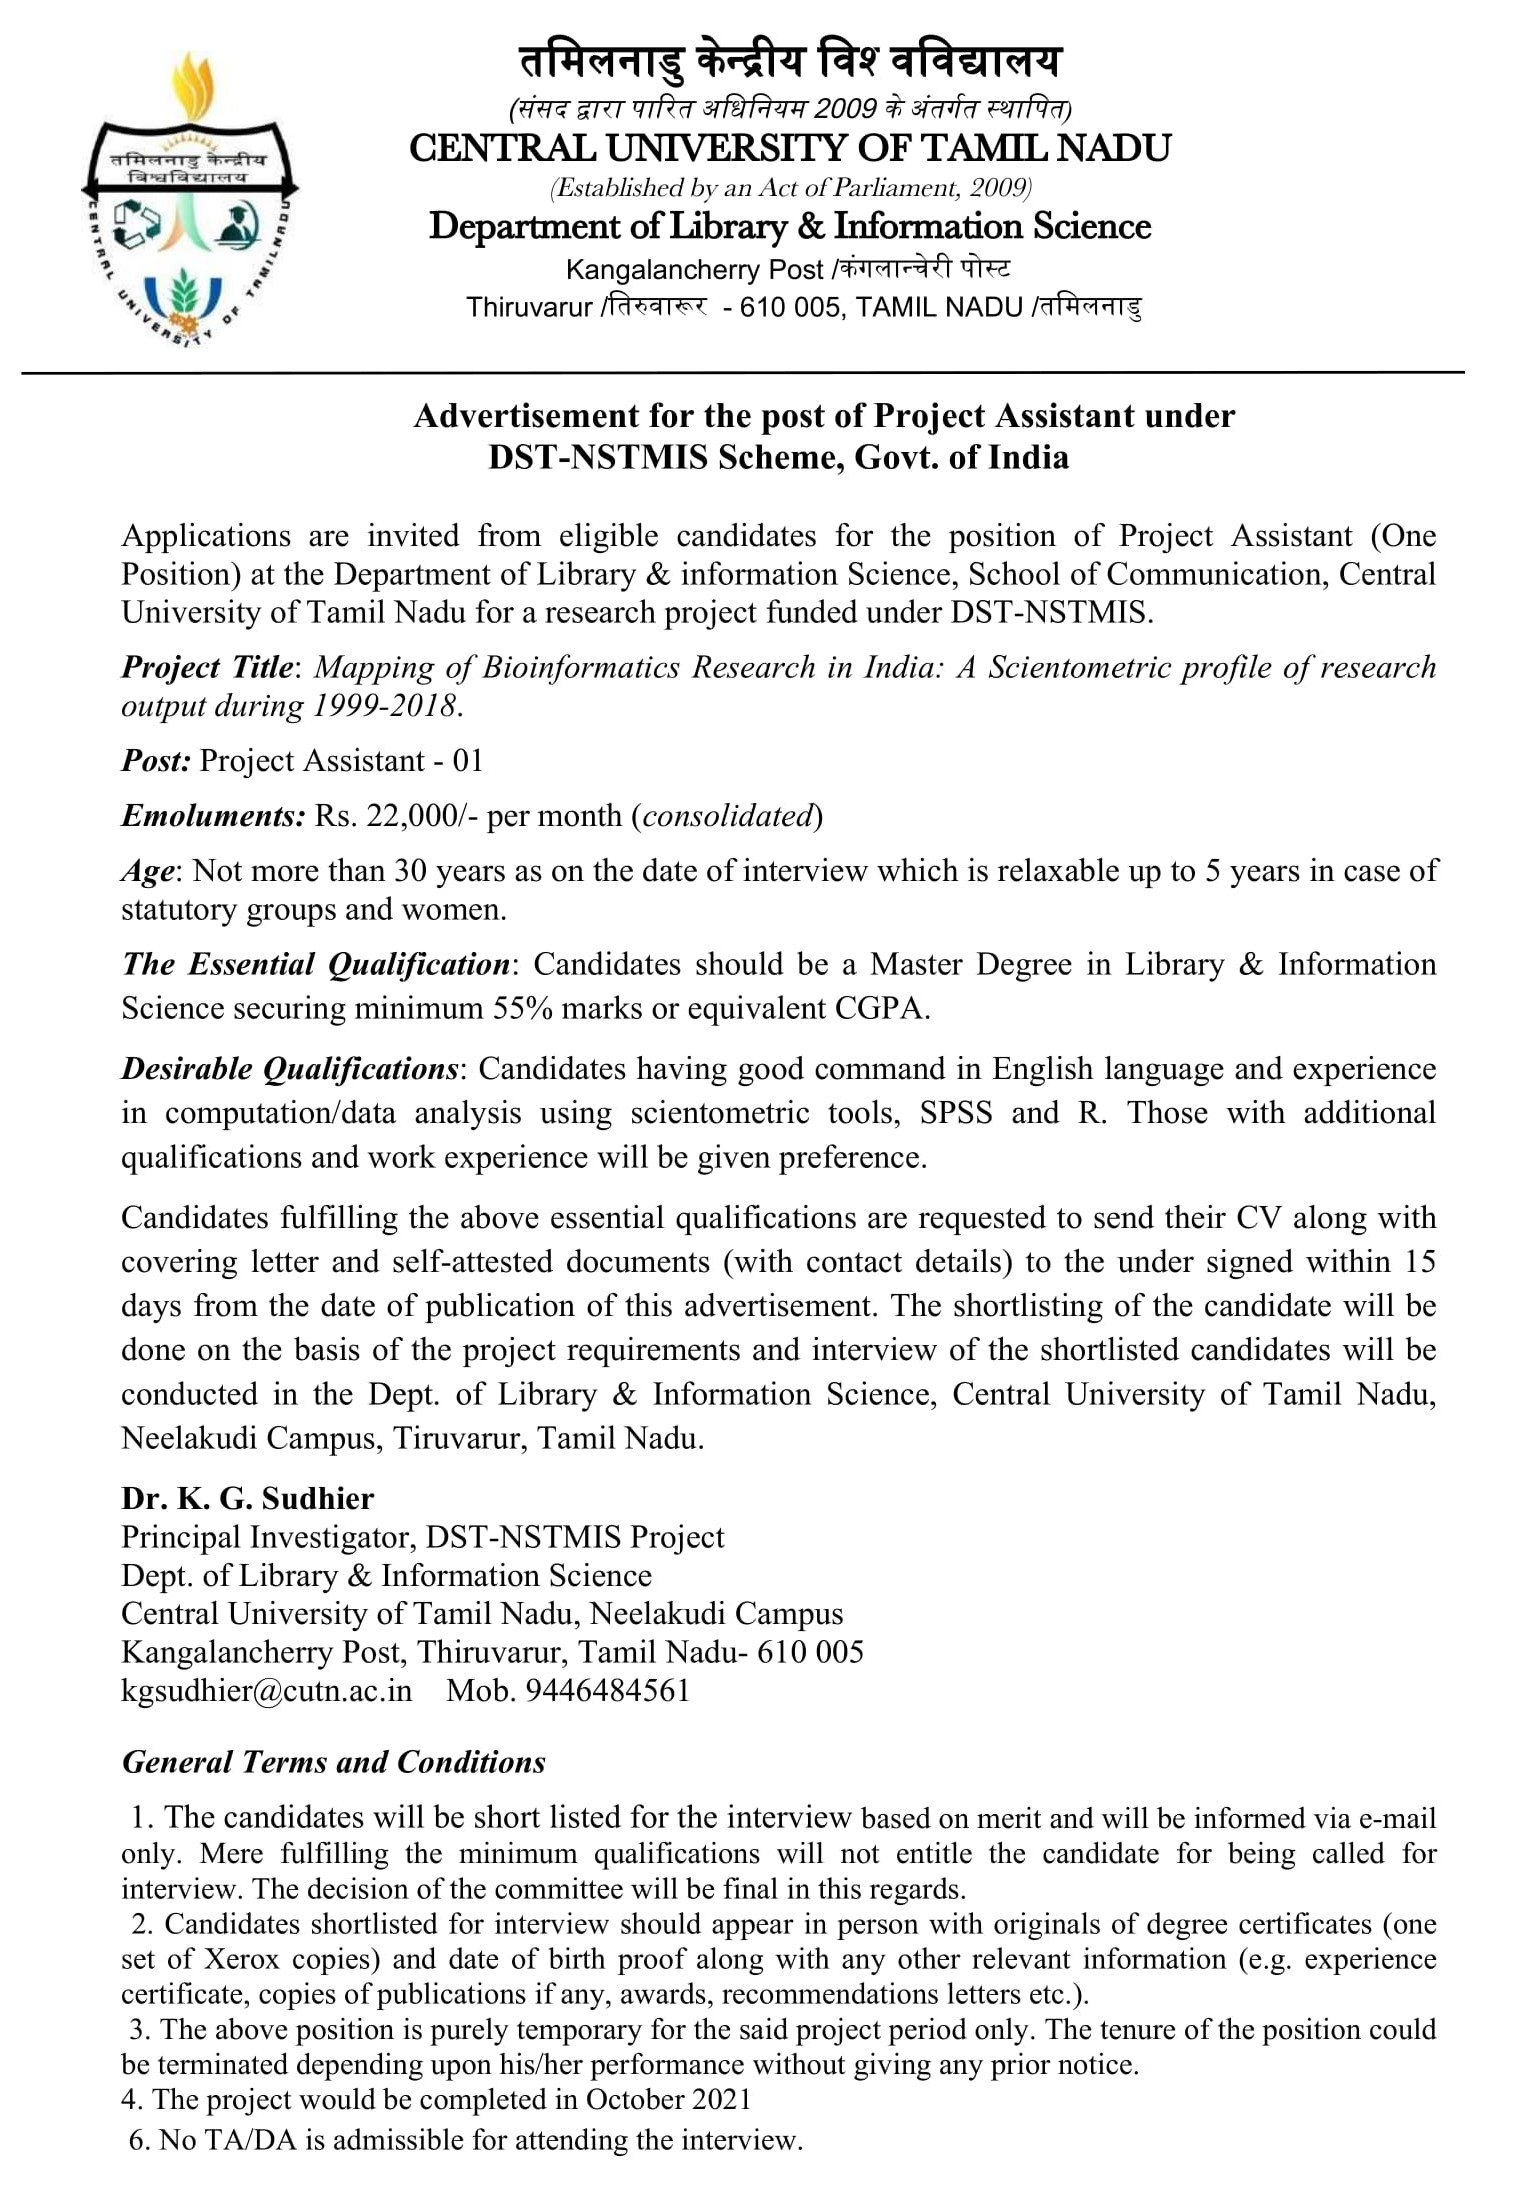 Advertisement_for_the_post_of_Project_Assistant_DST_NSTMIS_Scheme_06112019-1.jpg